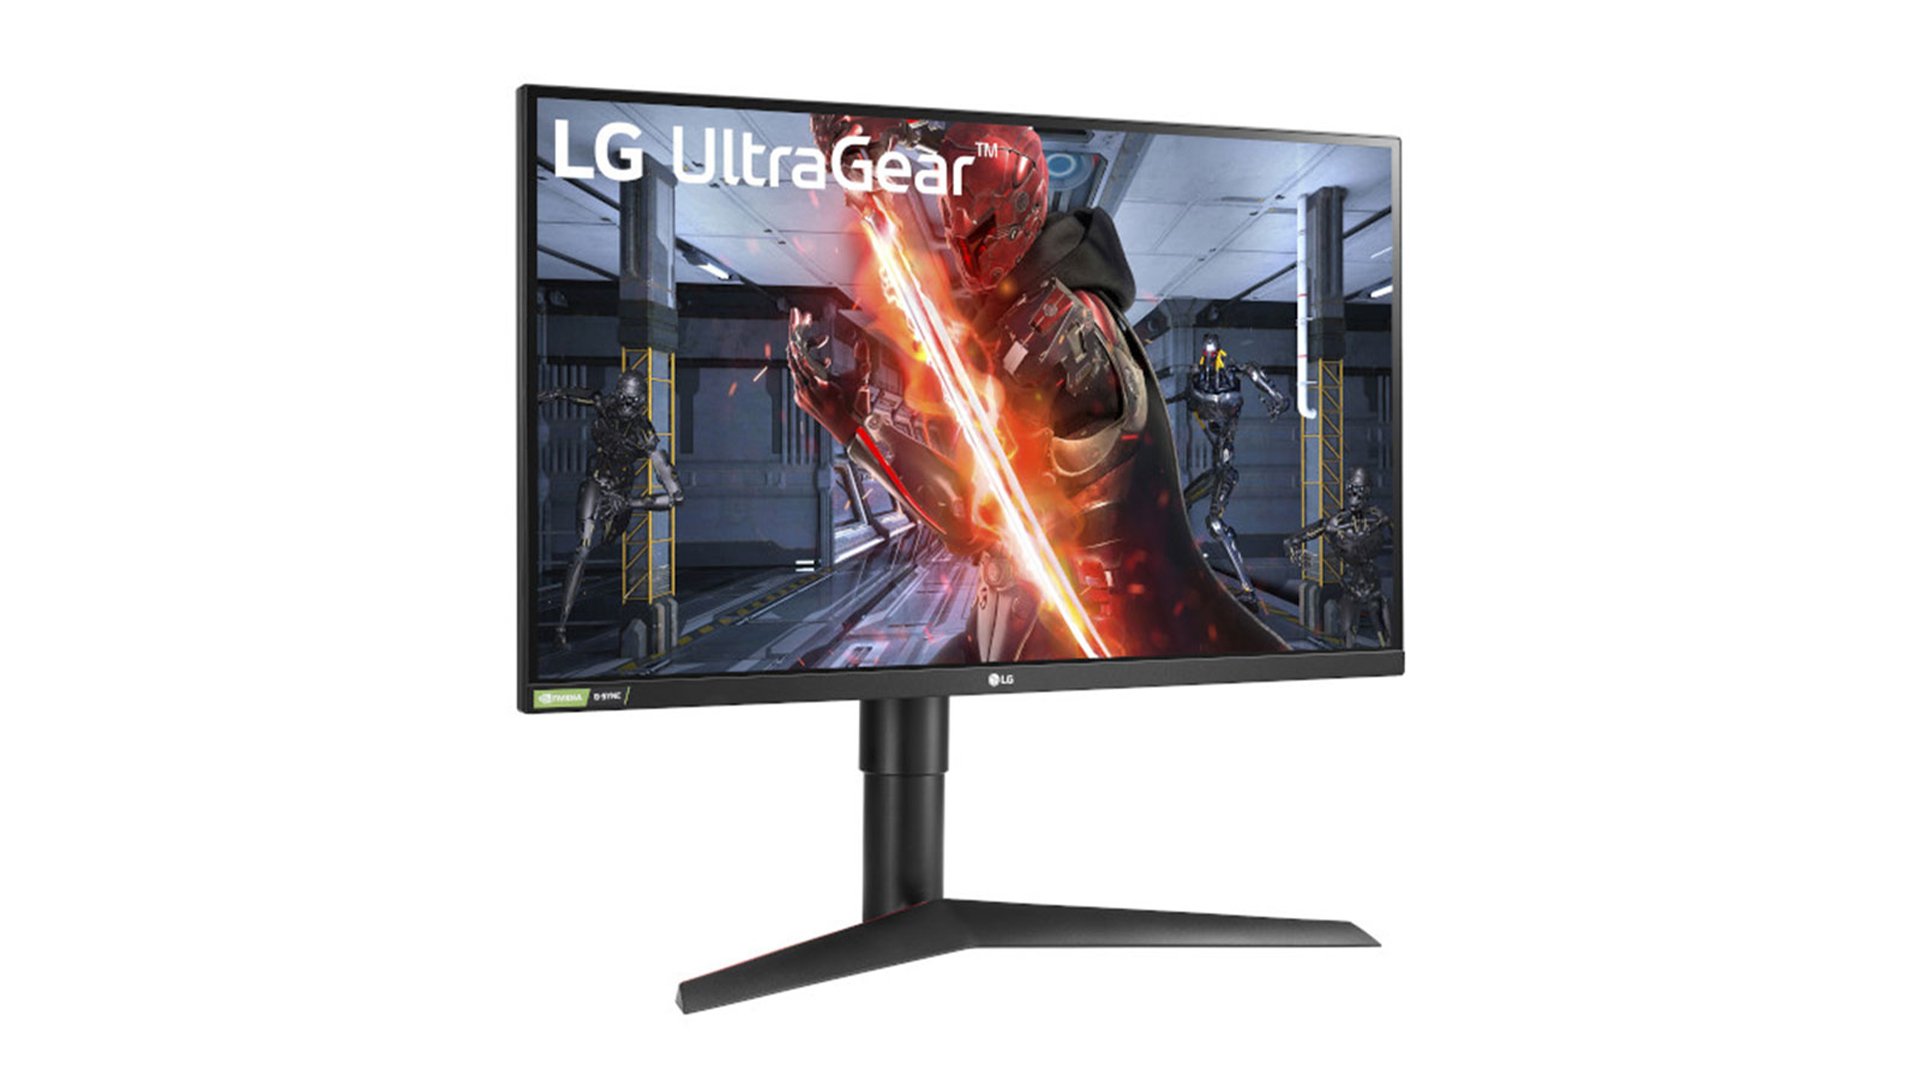 144hz gaming monitor by LG